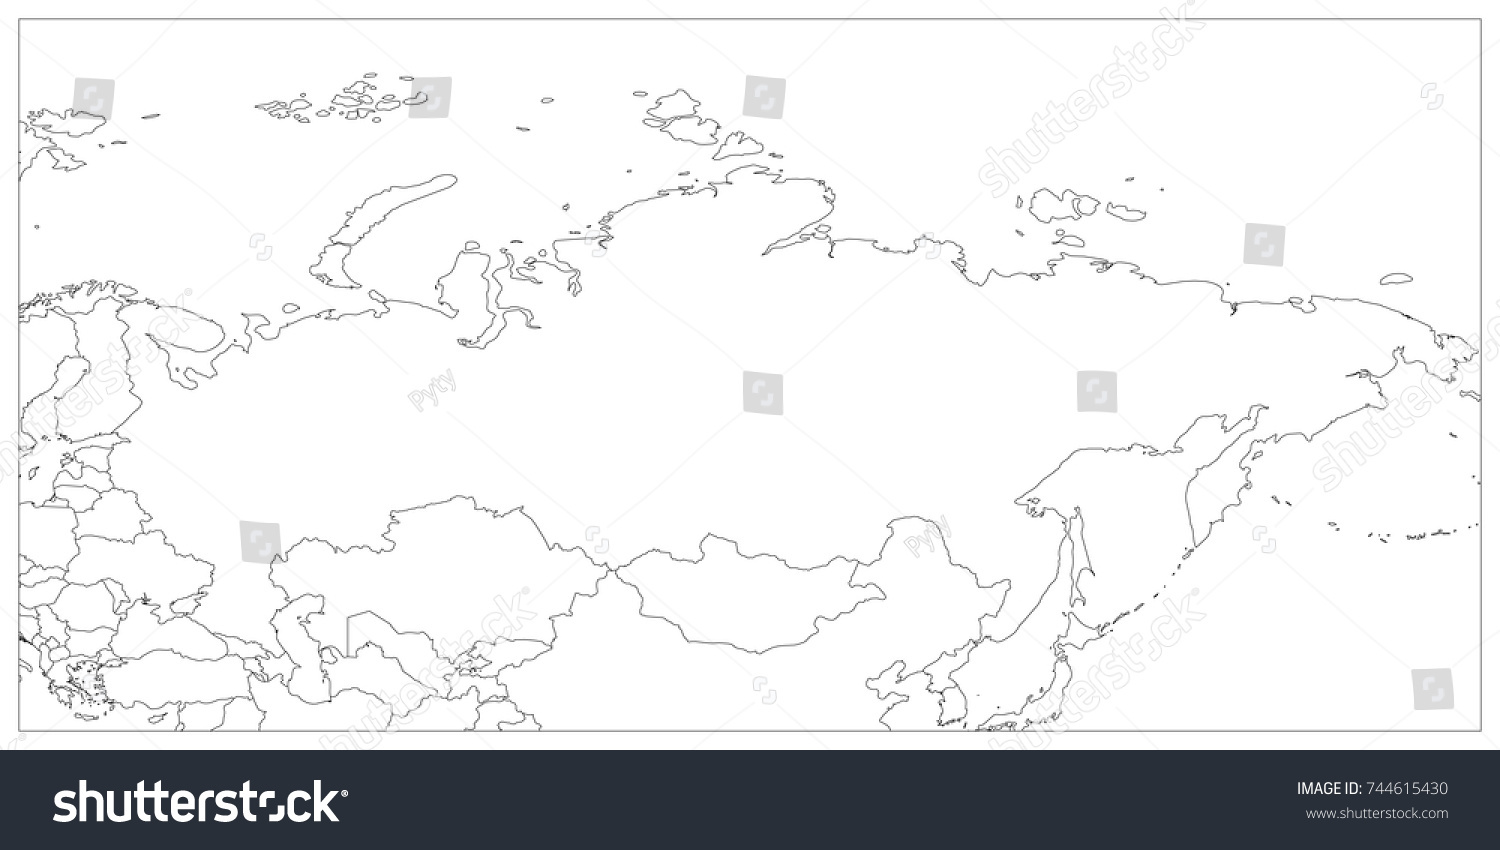 Political Map Russia Surrounding Countries Black Stock Vector